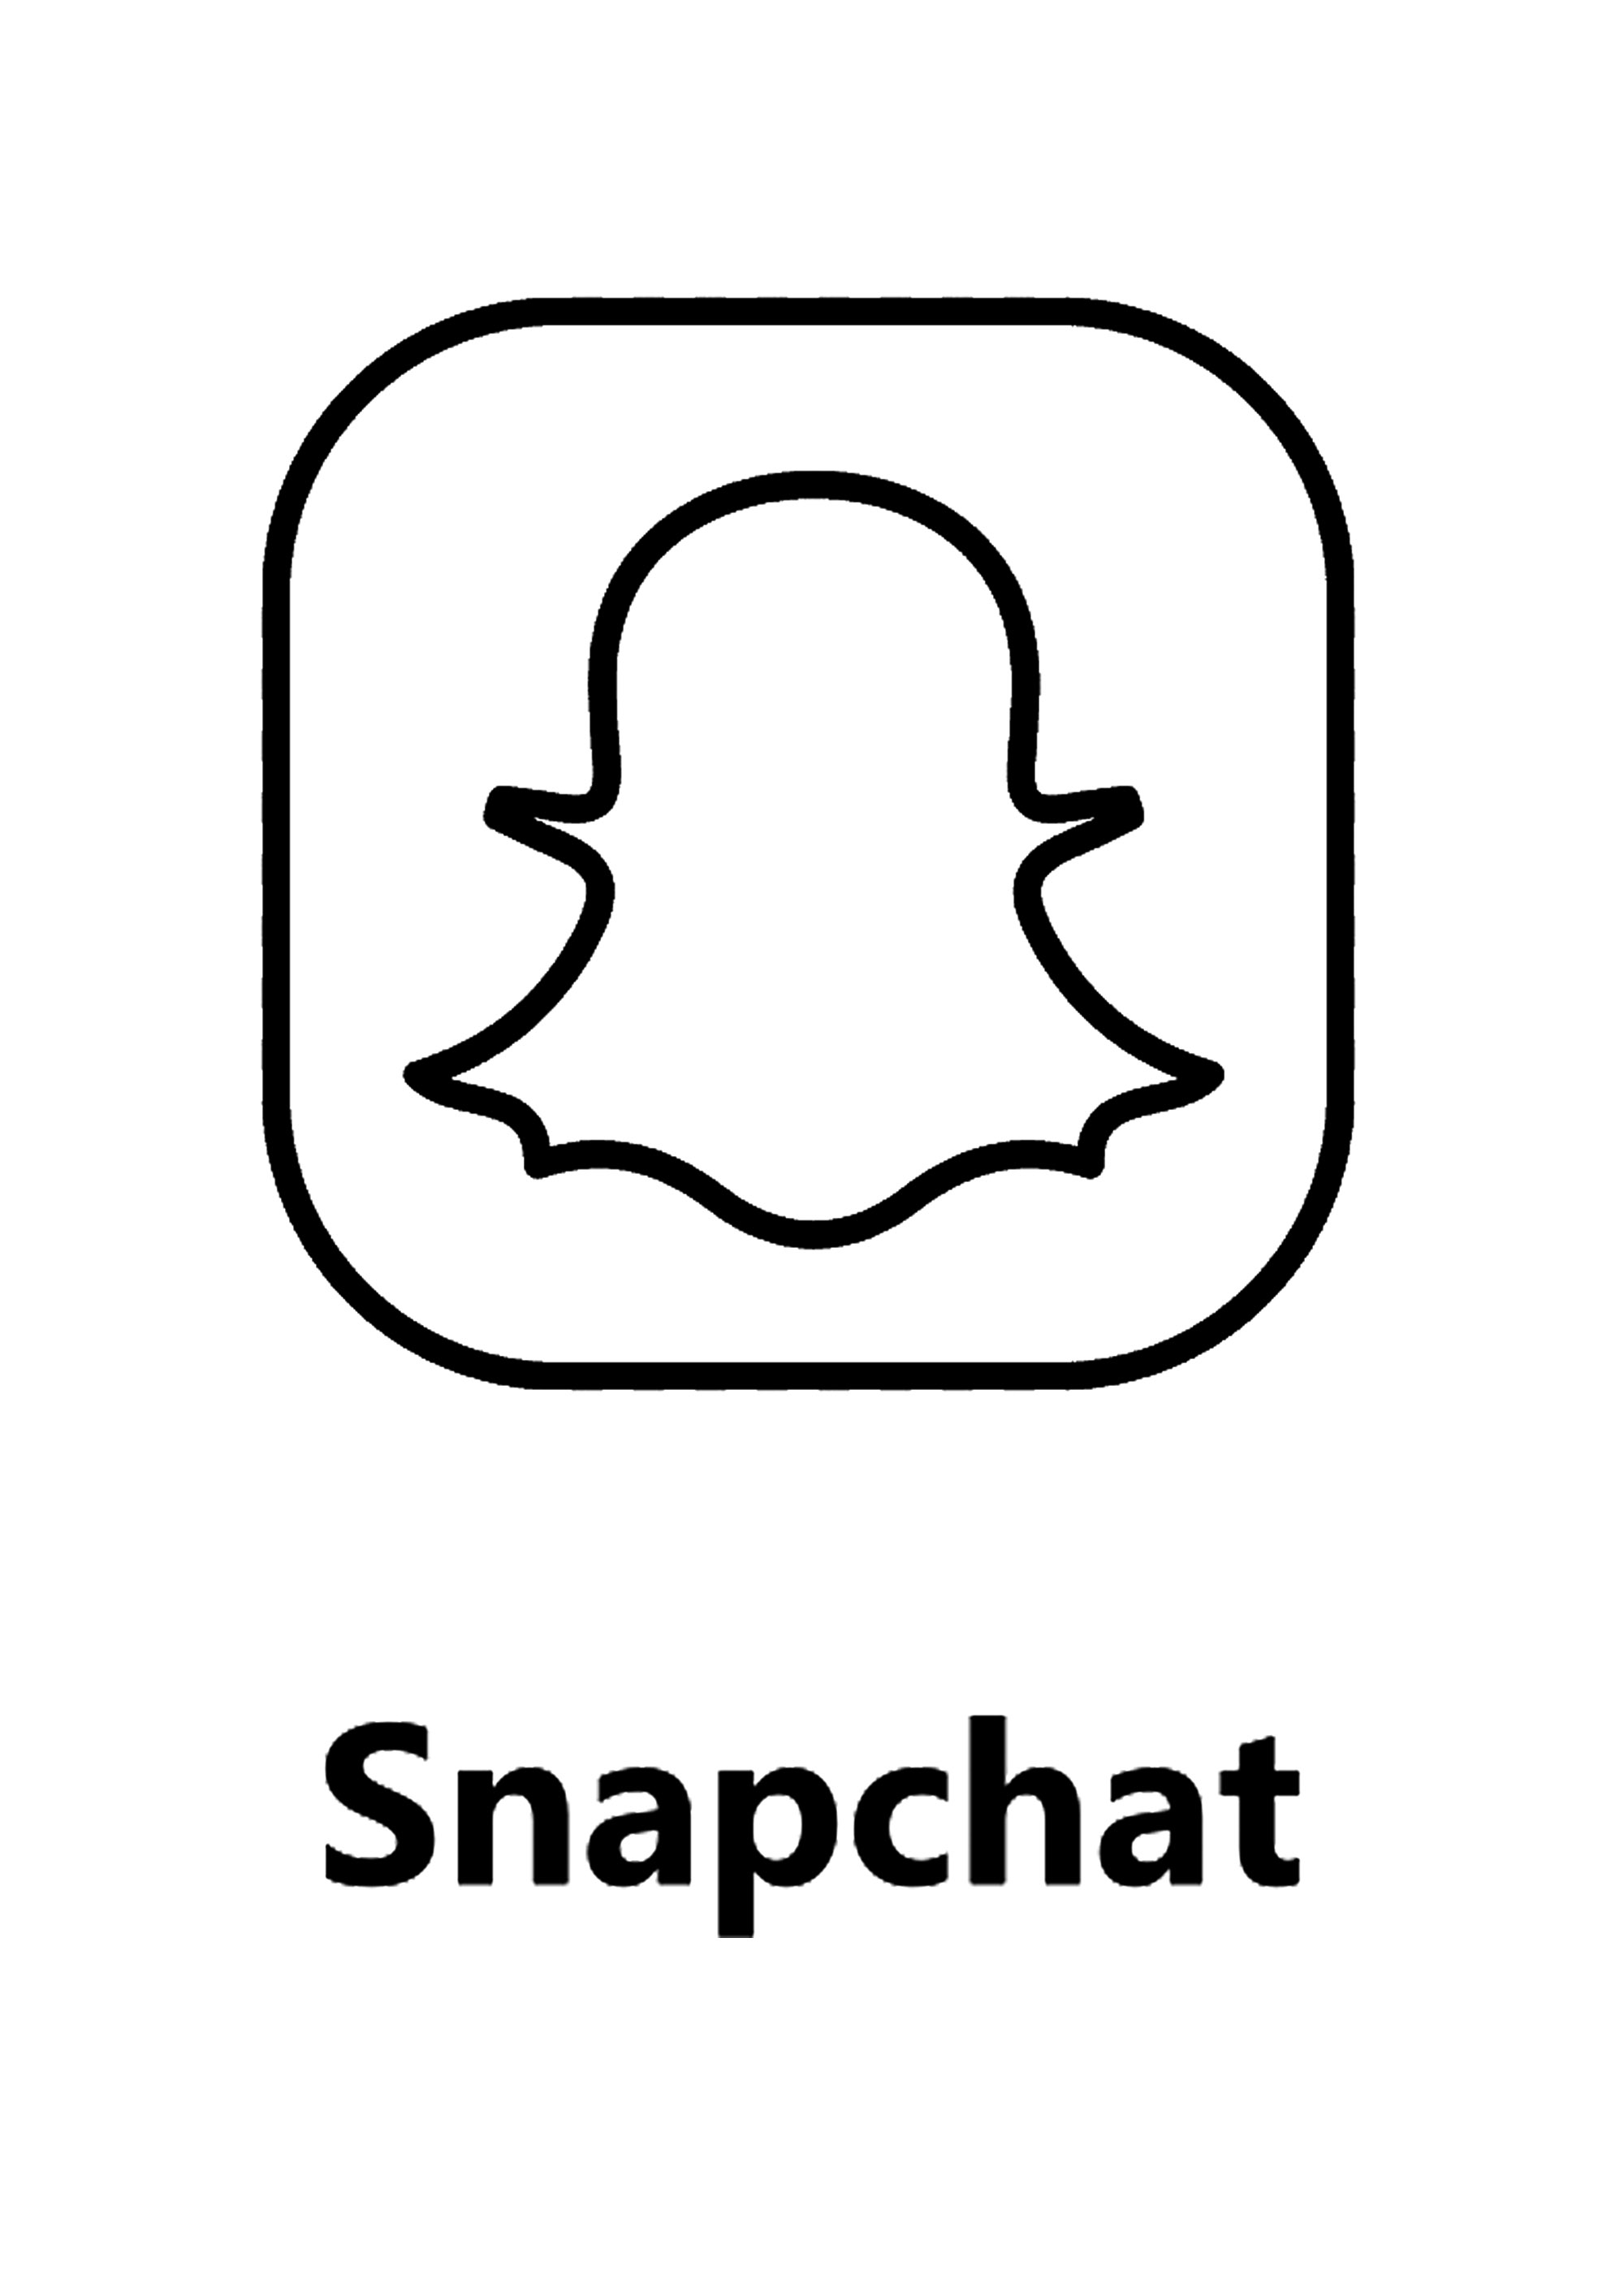 Coloring page of the Snapchat Logo. Snapchat is a multimedia messaging app that allows users to send photos, videos, and text messages that disappear after being viewed by the recipient. It's known for its ephemeral nature, filters and lenses, and playful user experience. Snapchat's popularity has been driven by its unique features, such as the ability to add filters and lenses to photos and videos, as well as its integration with augmented reality technology.